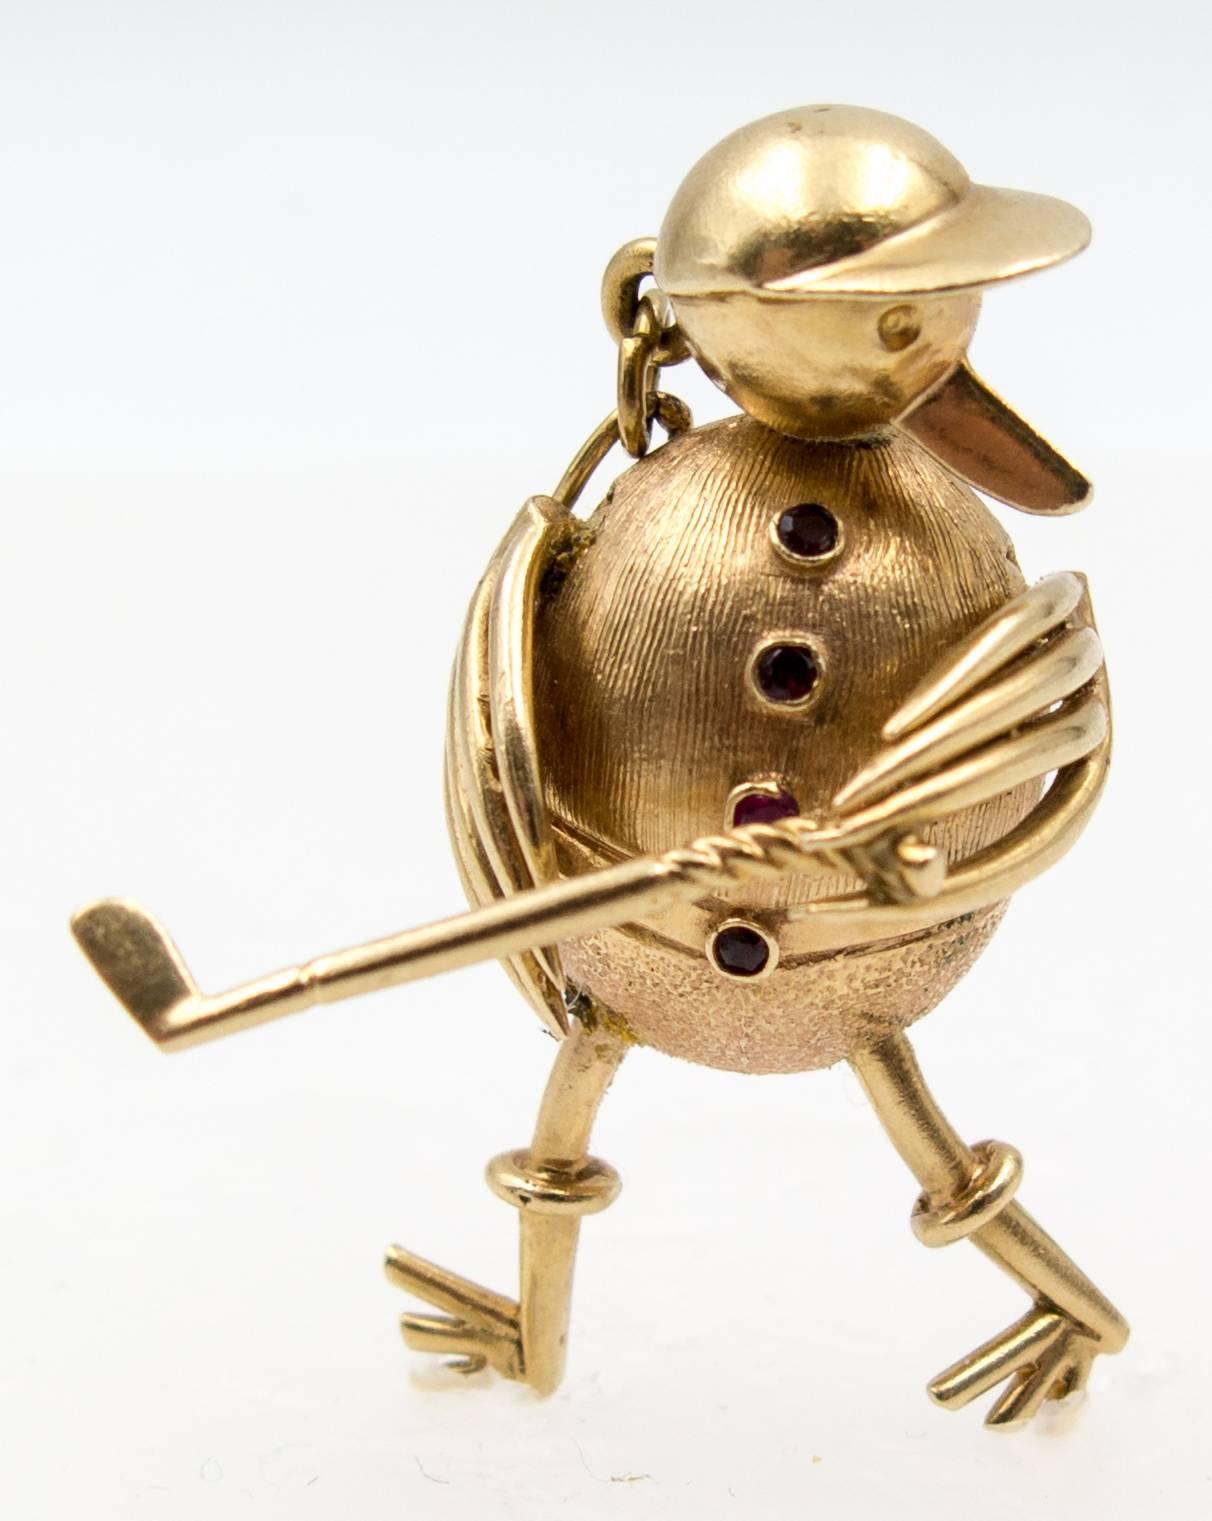 When you need an extra for your golfing foursome, this perky little guy will be happy to show you his swing.  His head, his wings, and his spindly legs all move to create different positions as needed.  He's crafted in 14 karat pink gold, weighs